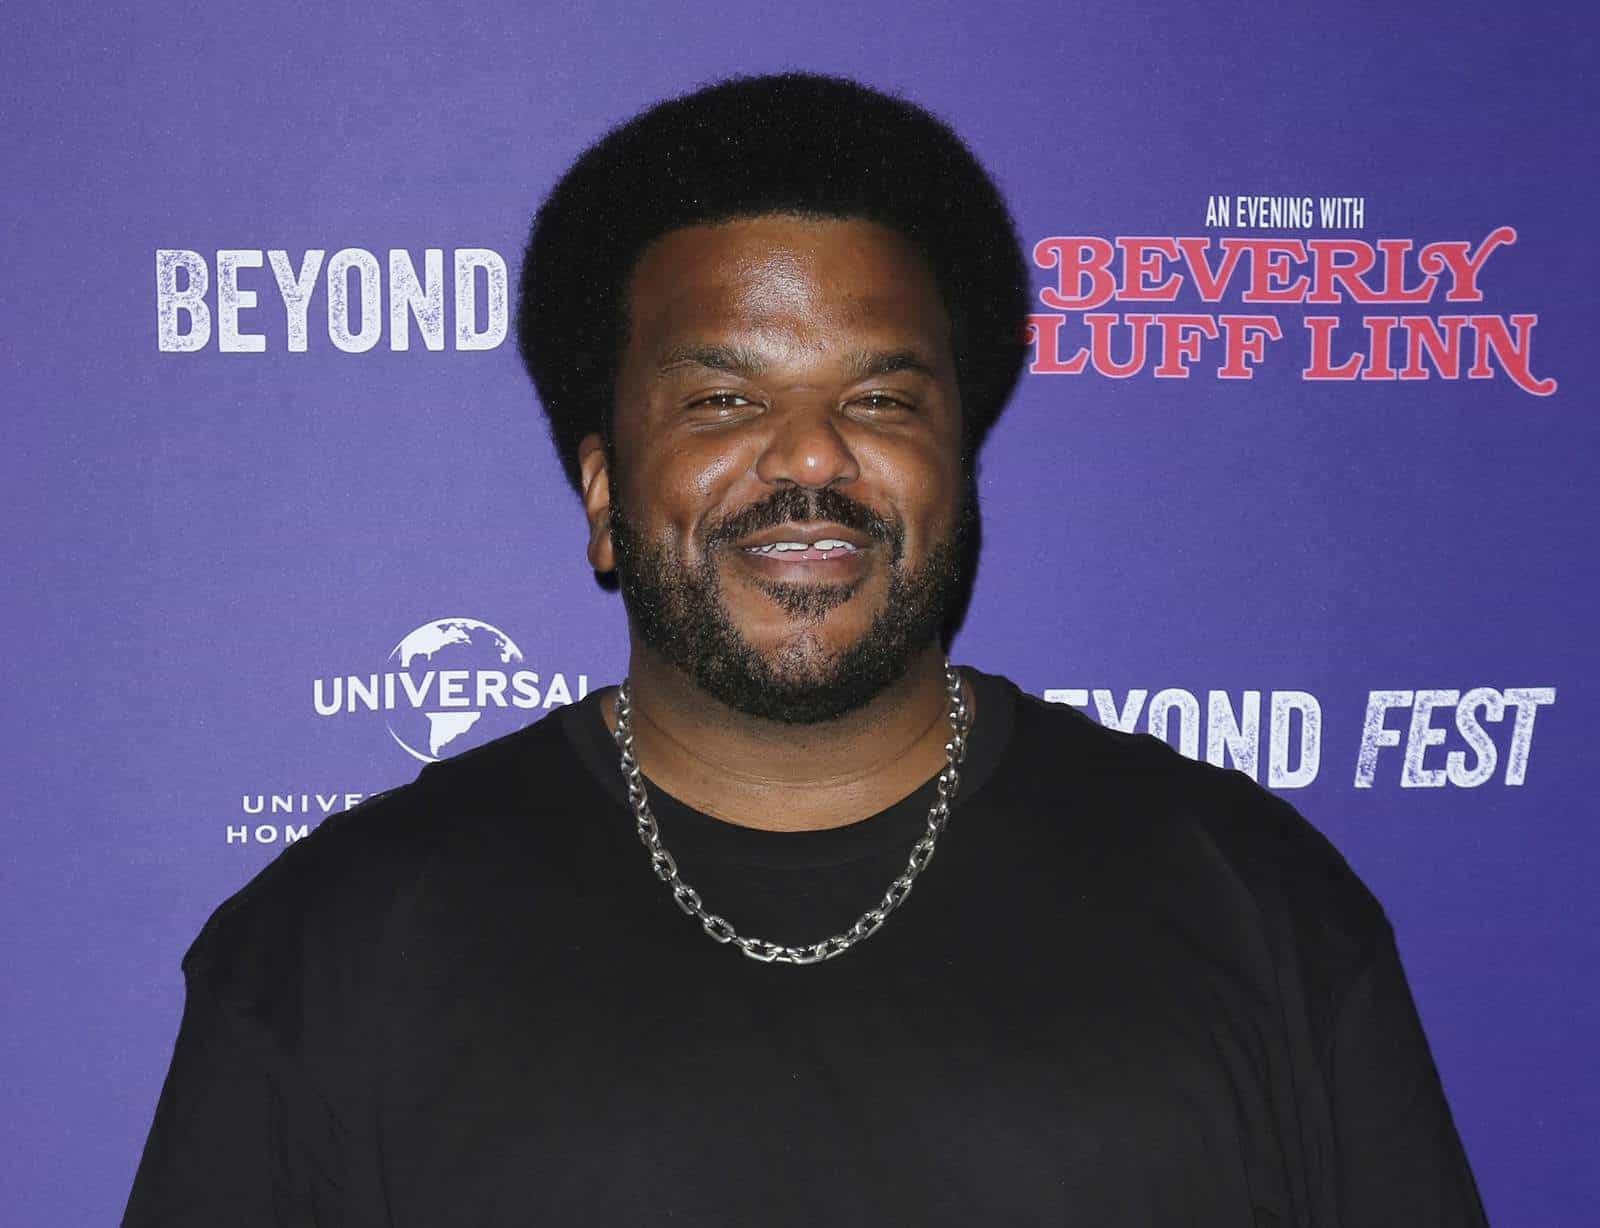 Image of Craig Robinson after losing weight